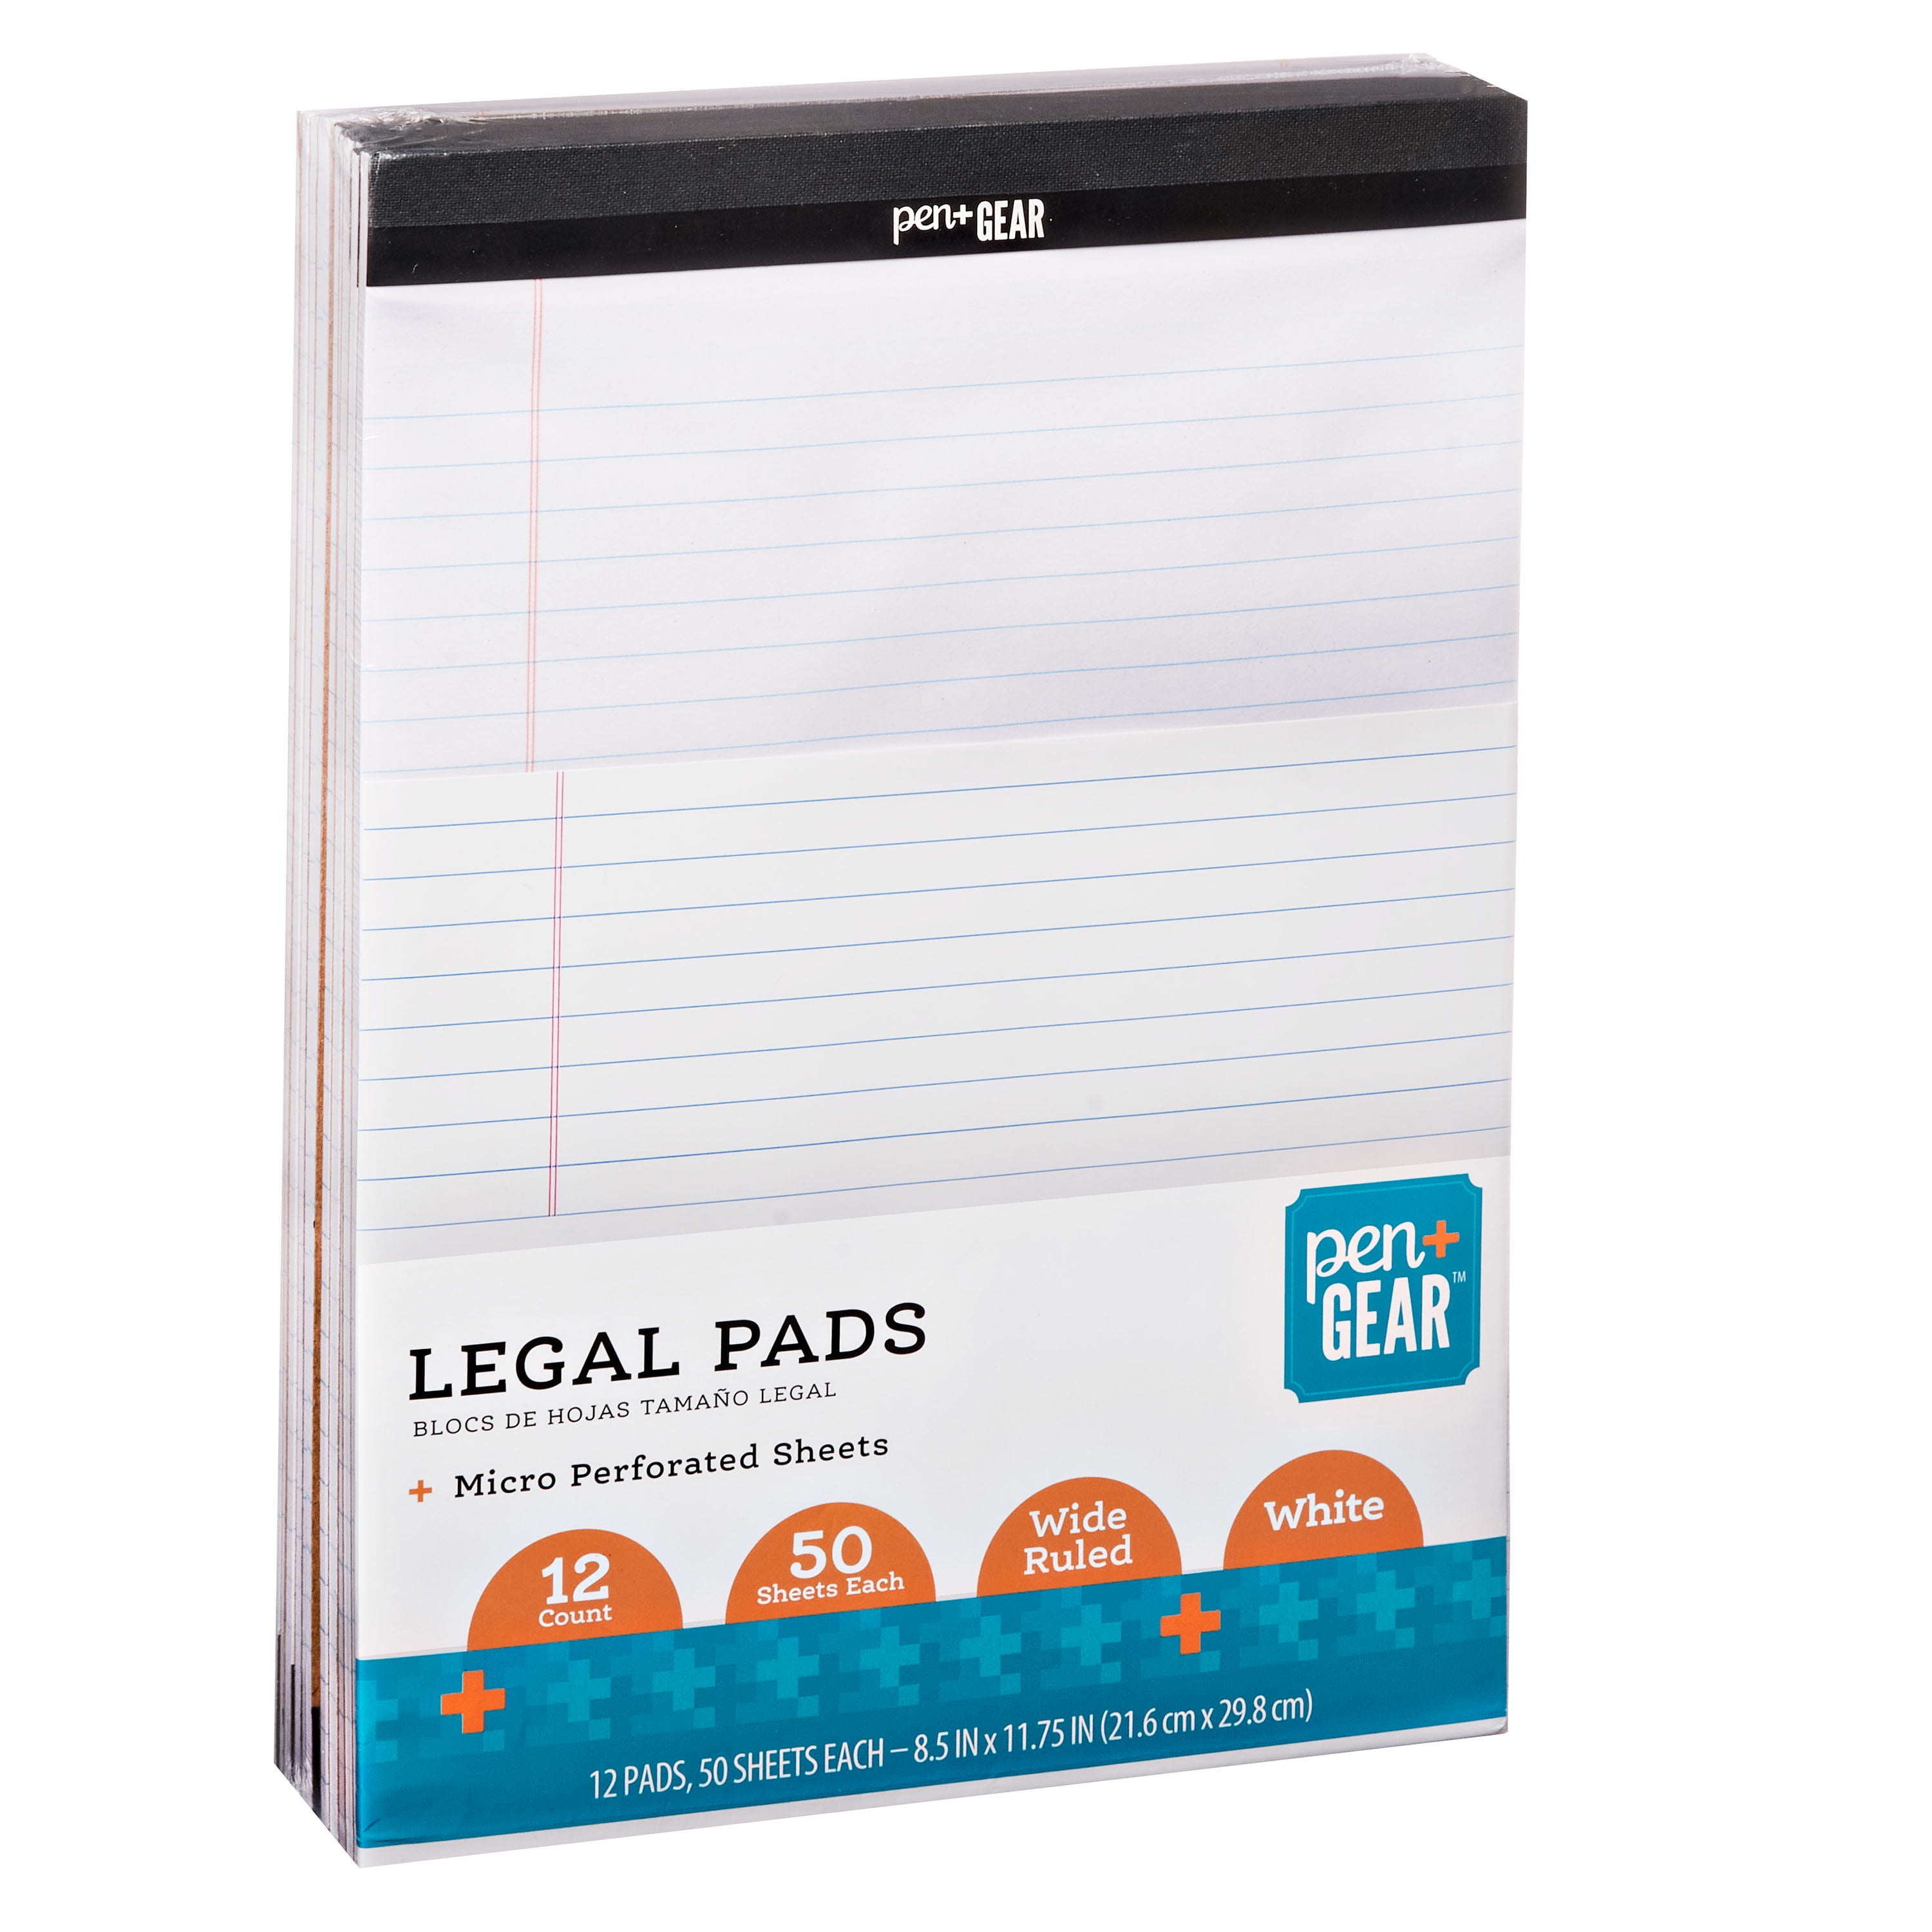 Pen + Gear Wide Ruled Legal Pads, 8.5x11, White, 50 Sheets, 12 Pack 